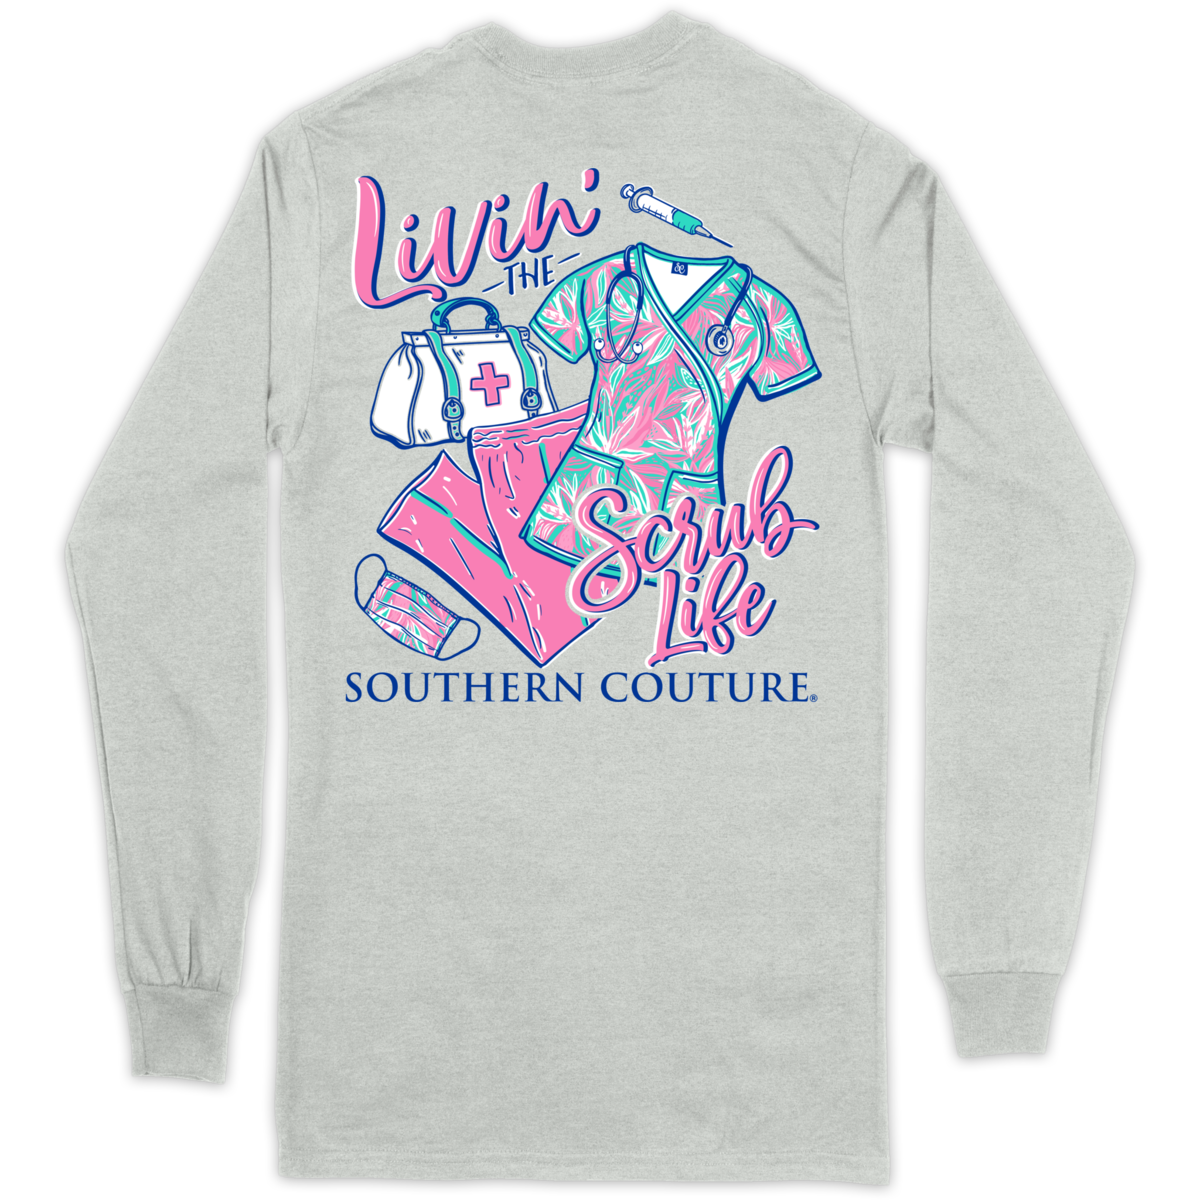 Southern Couture Scrub Life Long Sleeve T-shirt